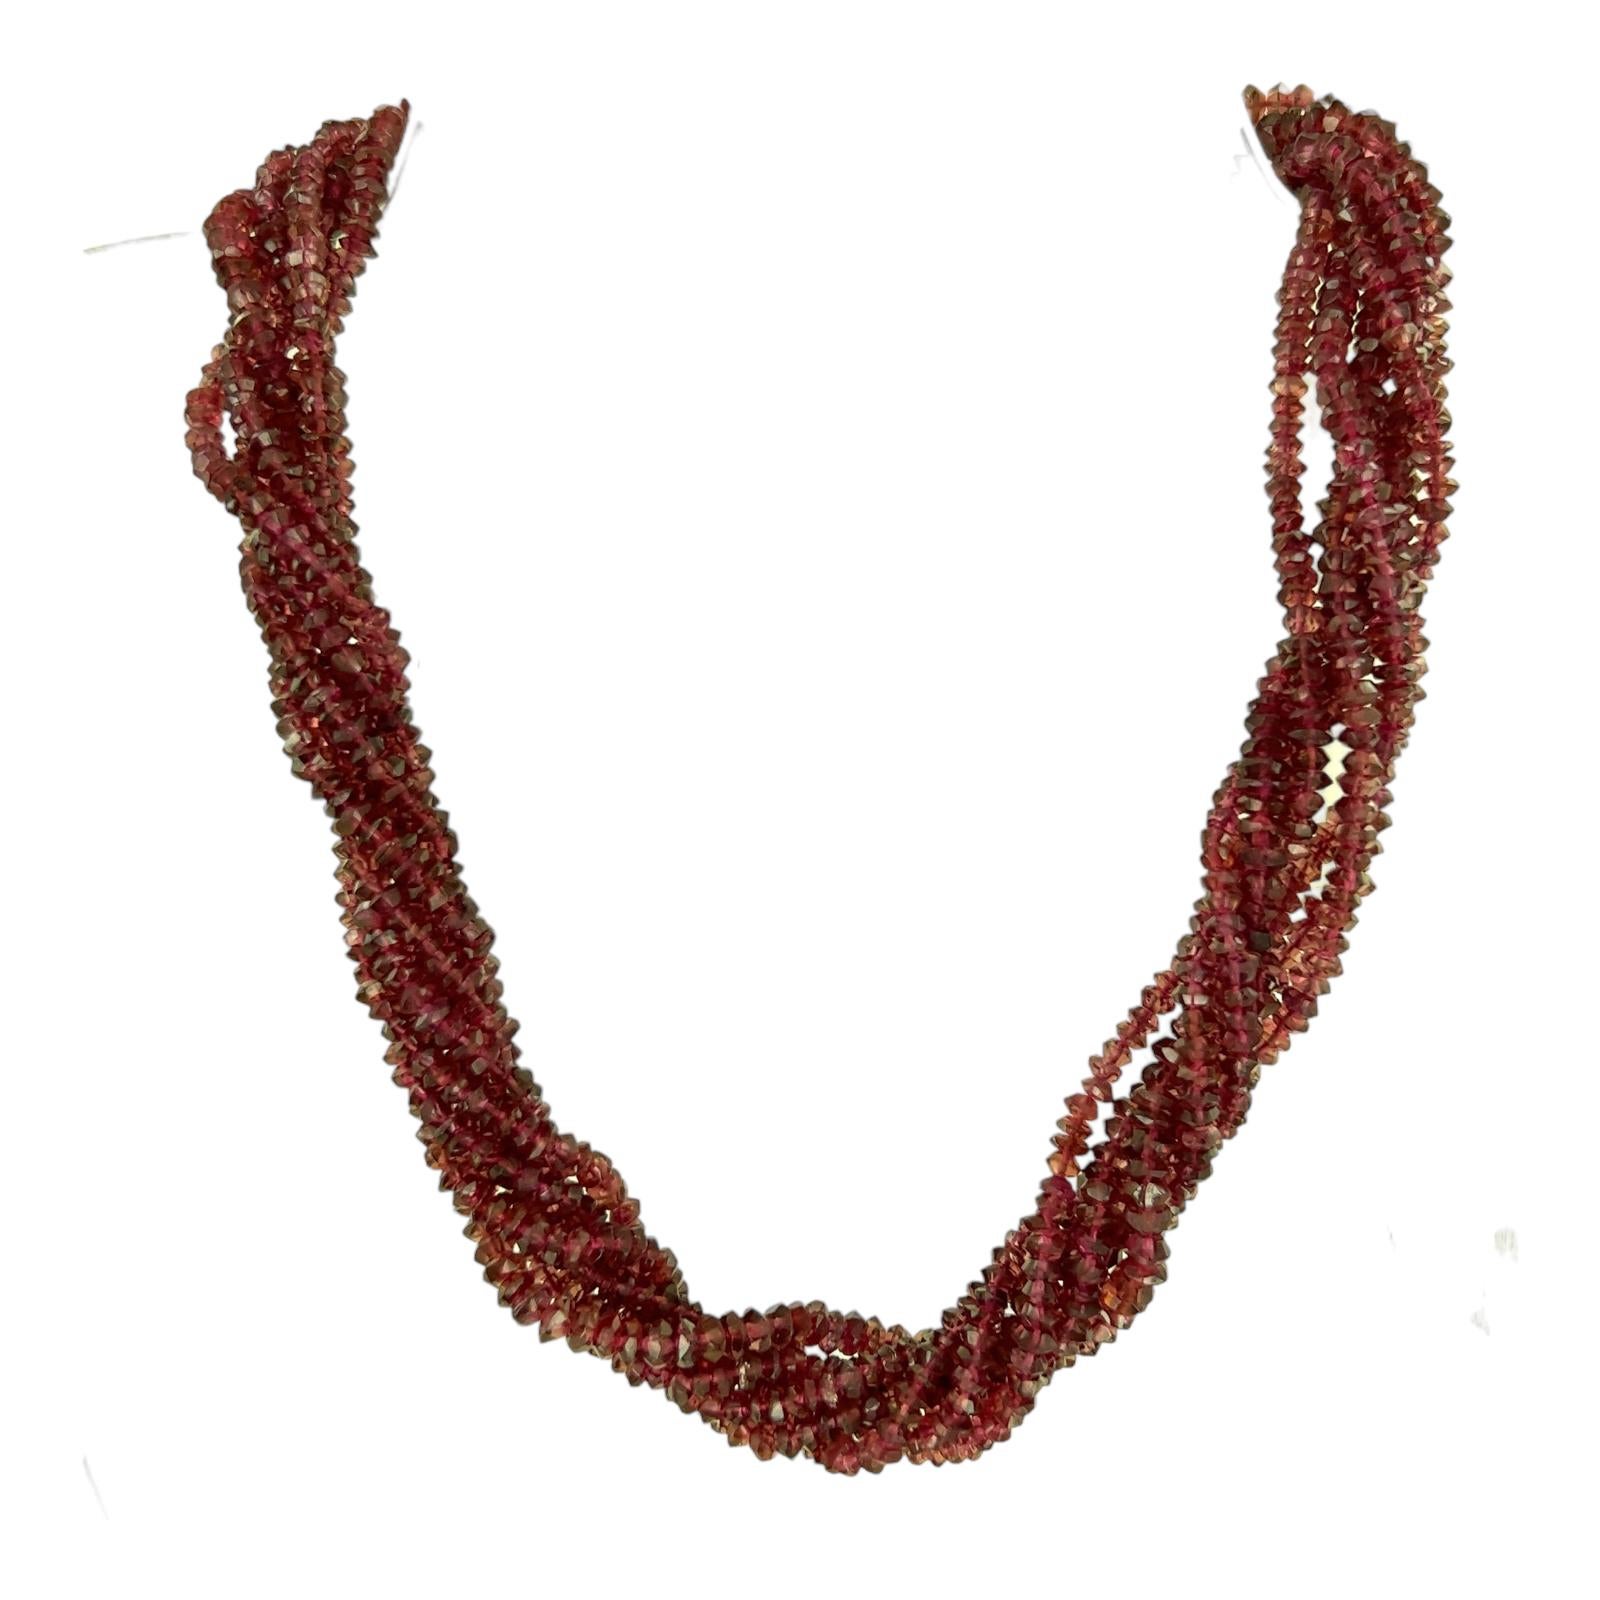 Seven strand ruby bead necklace handcrafted wtih a 14 karat yellow gold hook clasp. The necklace features 7 strands of natural ruby gemstone beads and measures 16 inches in length. Hand crafted gold clasp. 